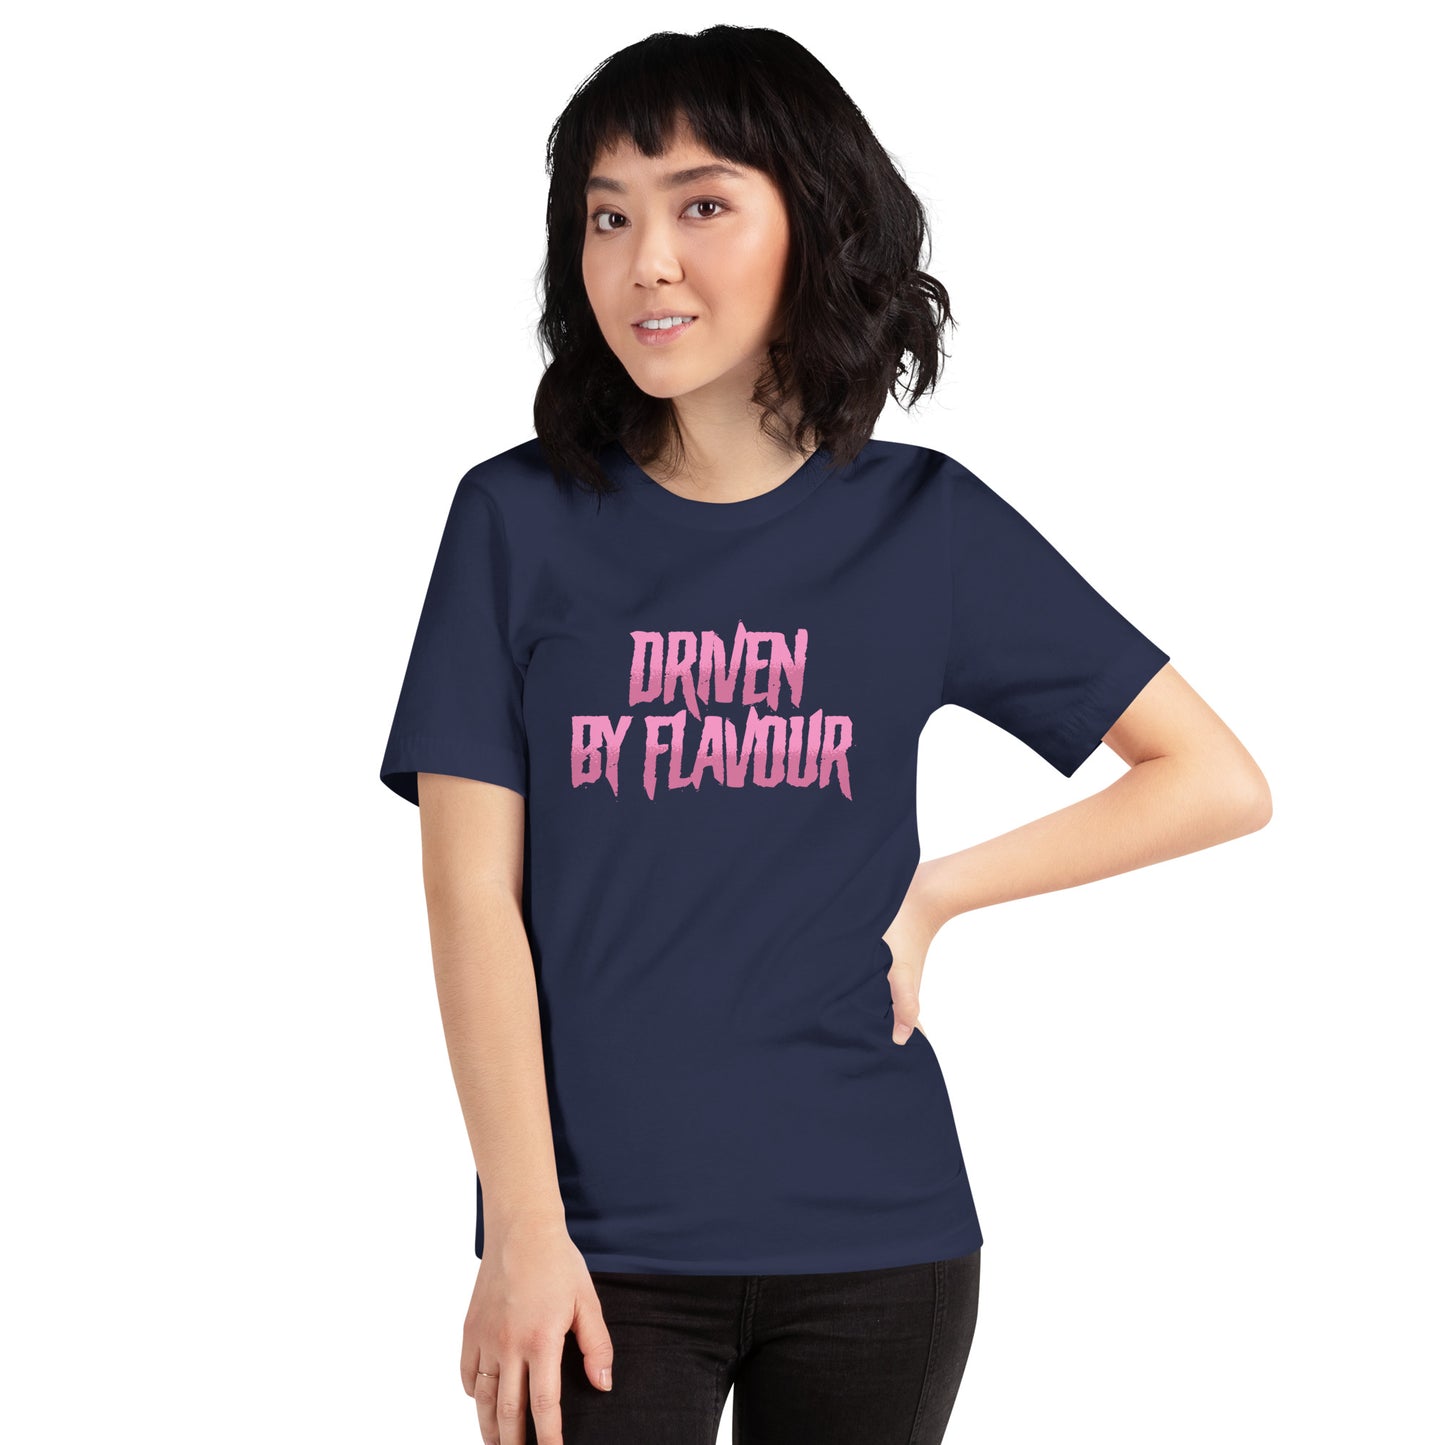 Driven by Flavor & Anime Fusion T-Shirt